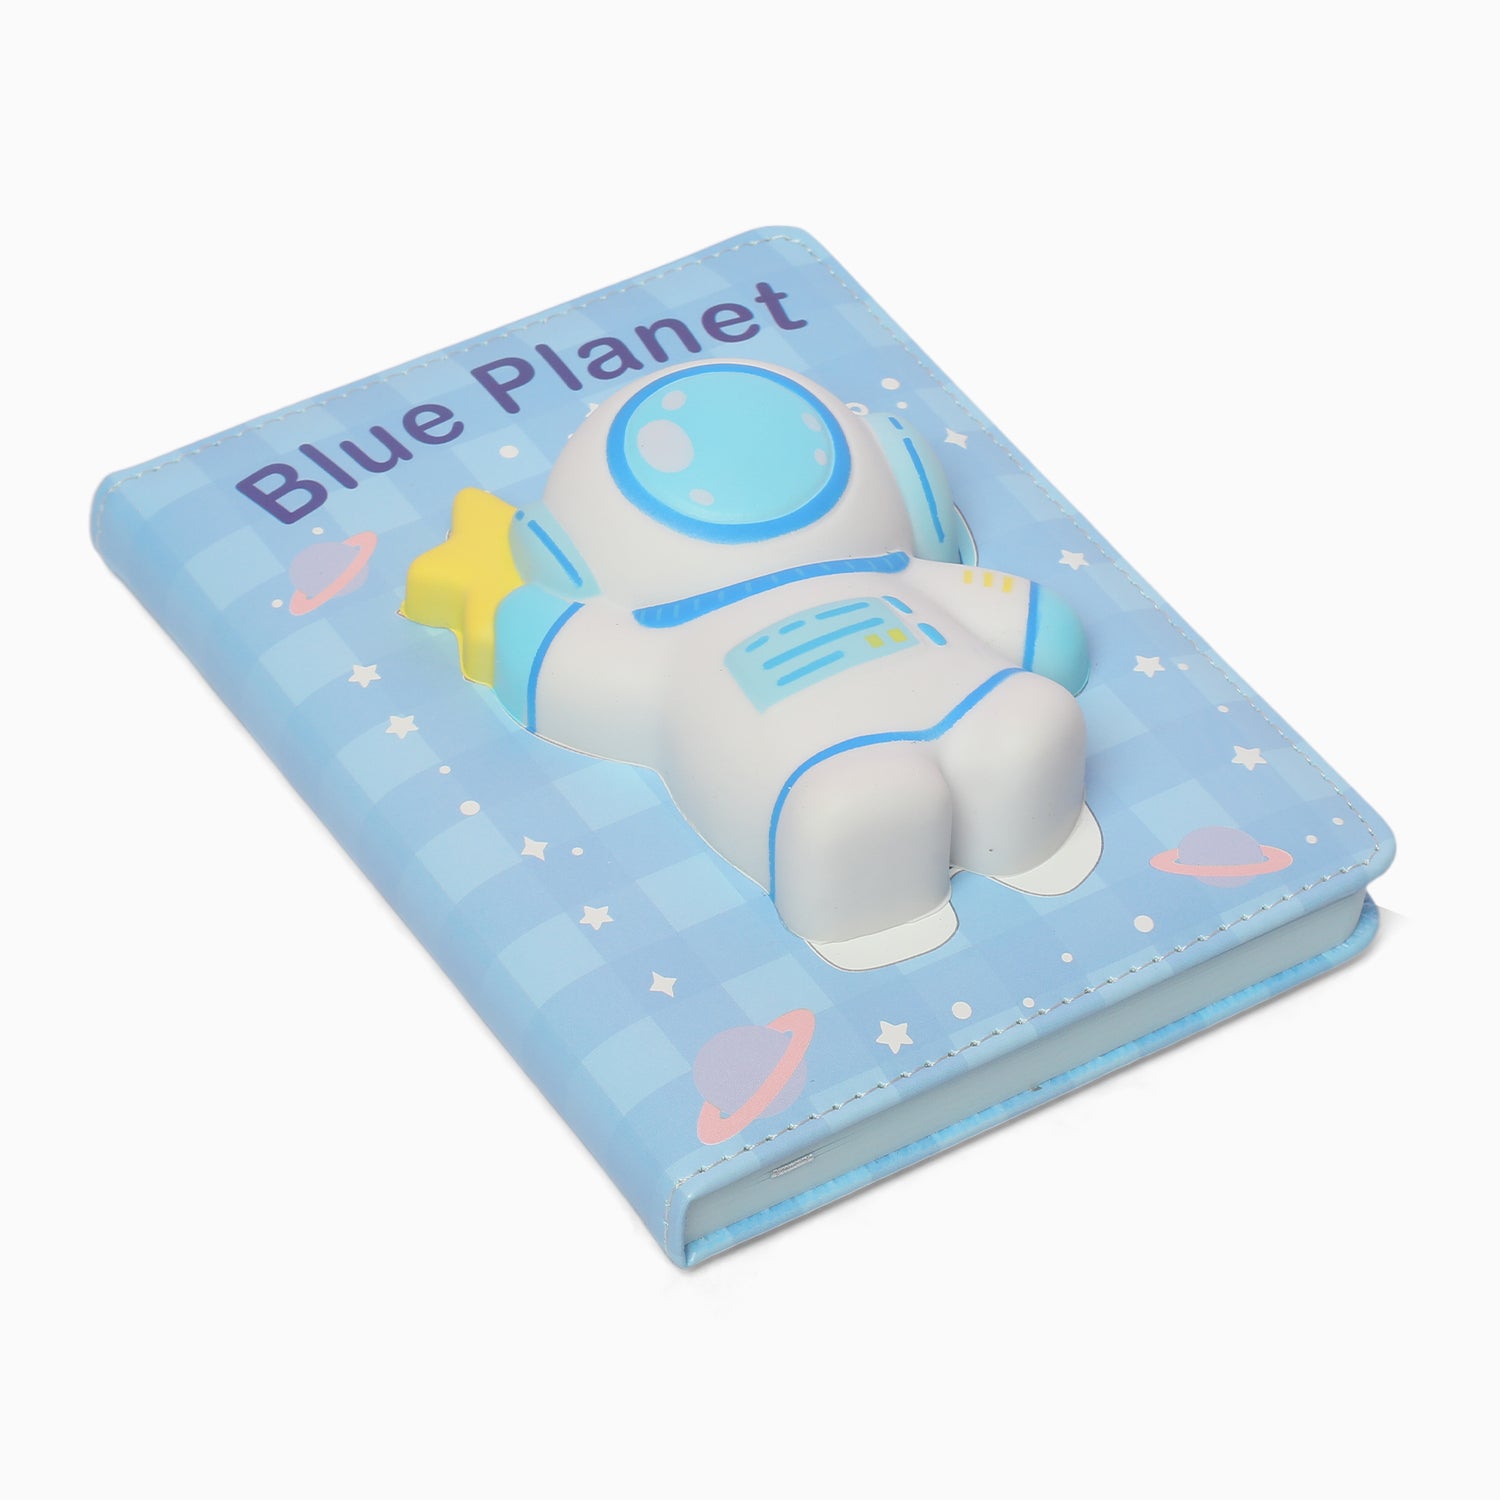 ZORSE Cute 3D Squishy Space Themed Fancy Notebook with printed pages for your tots